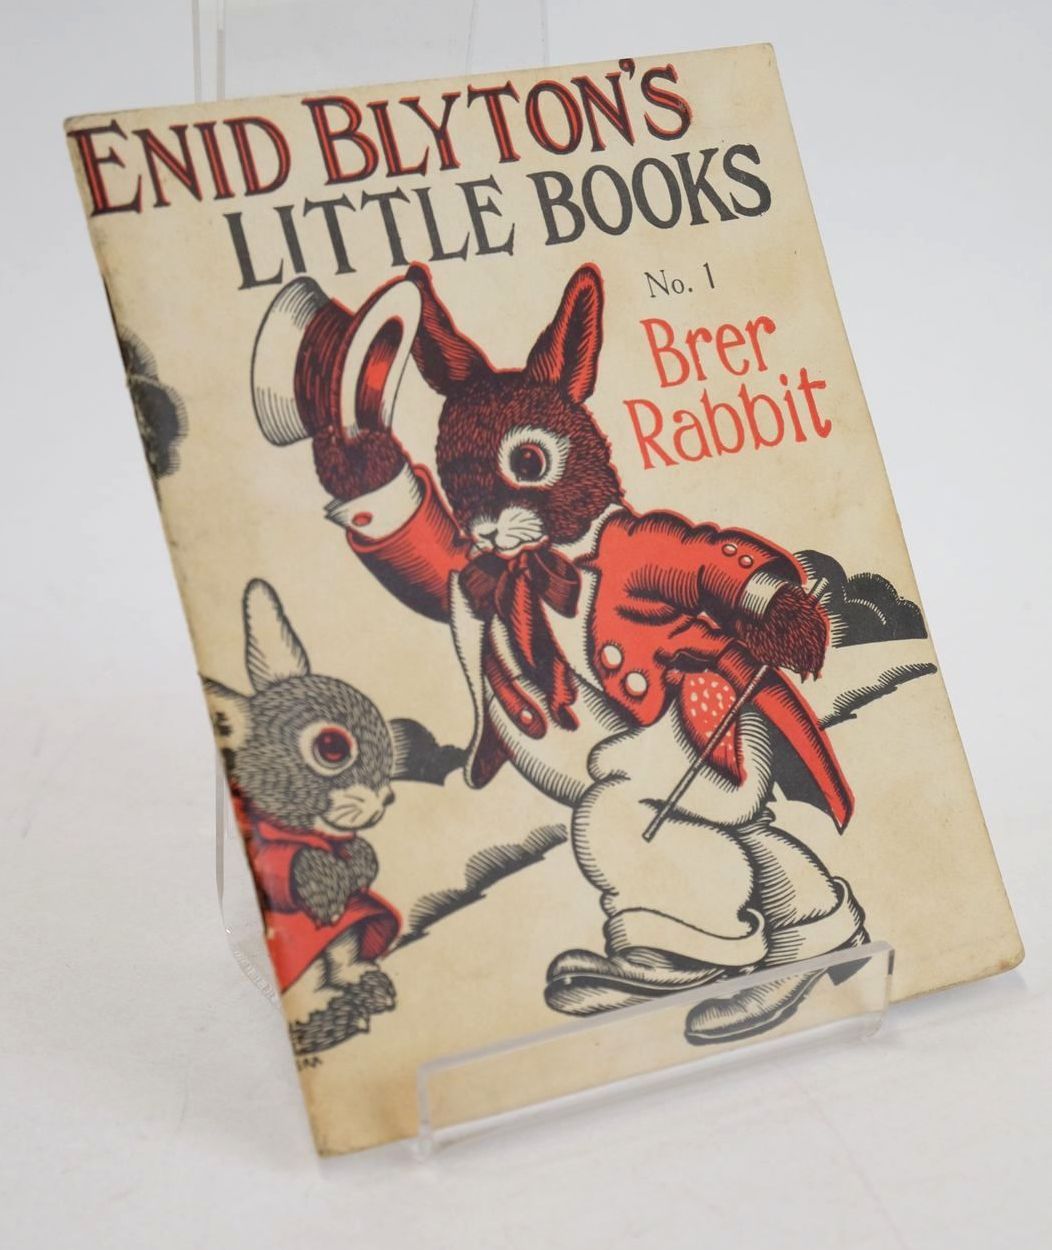 Photo of ENID BLYTON'S LITTLE BOOKS NO. 1 - BRER RABBIT written by Blyton, Enid illustrated by Kerr, Alfred E. published by Evans Brothers Limited (STOCK CODE: 1327649)  for sale by Stella & Rose's Books